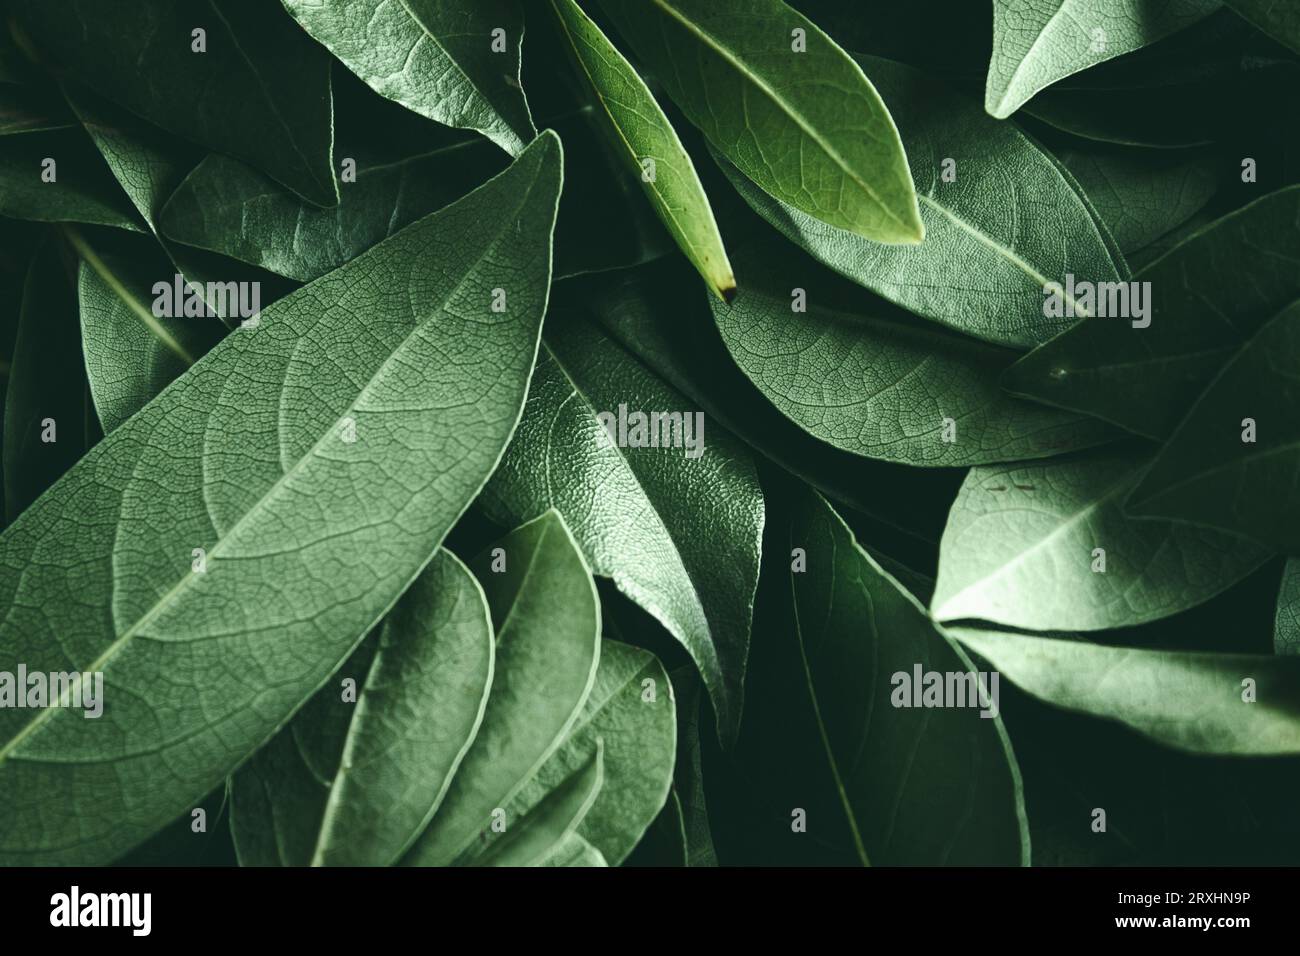 Close up of leaves. Daphne leaves background high angle view. Selective focus included Stock Photo